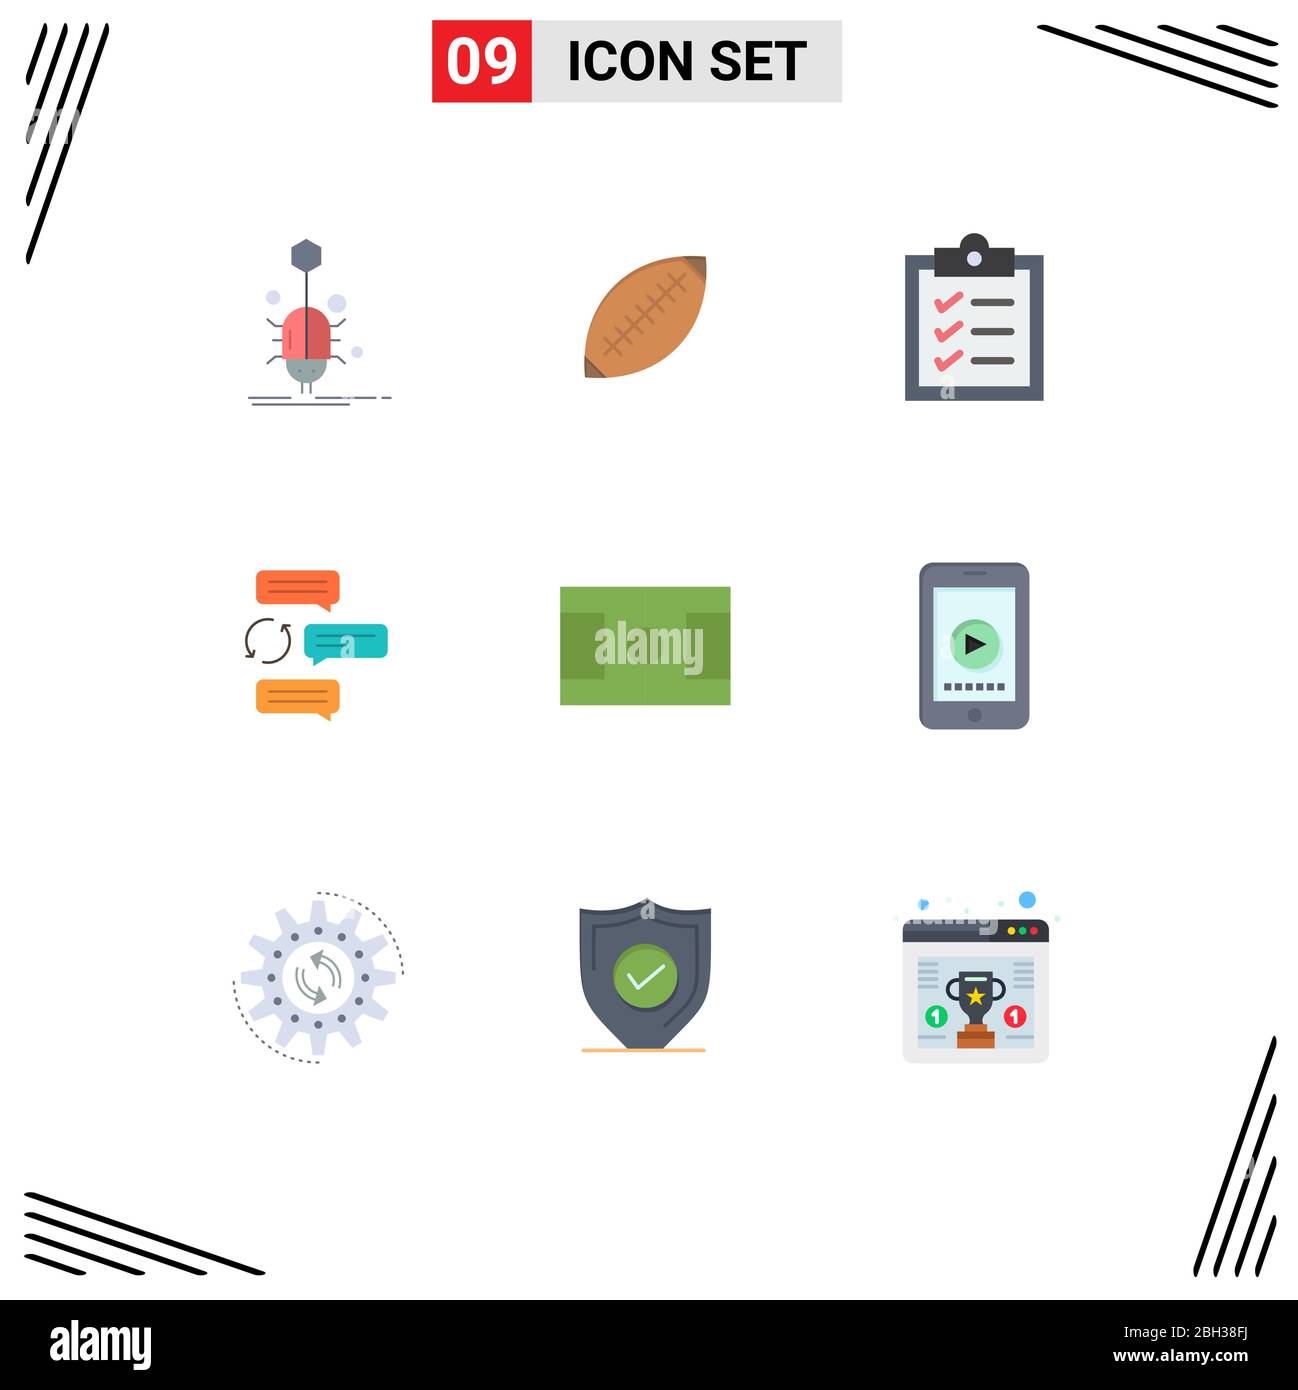 Universal Icon Symbols Group of 9 Modern Flat Colors of conversation, chat, rugby, tasks, clipboard Editable Vector Design Elements Stock Vector